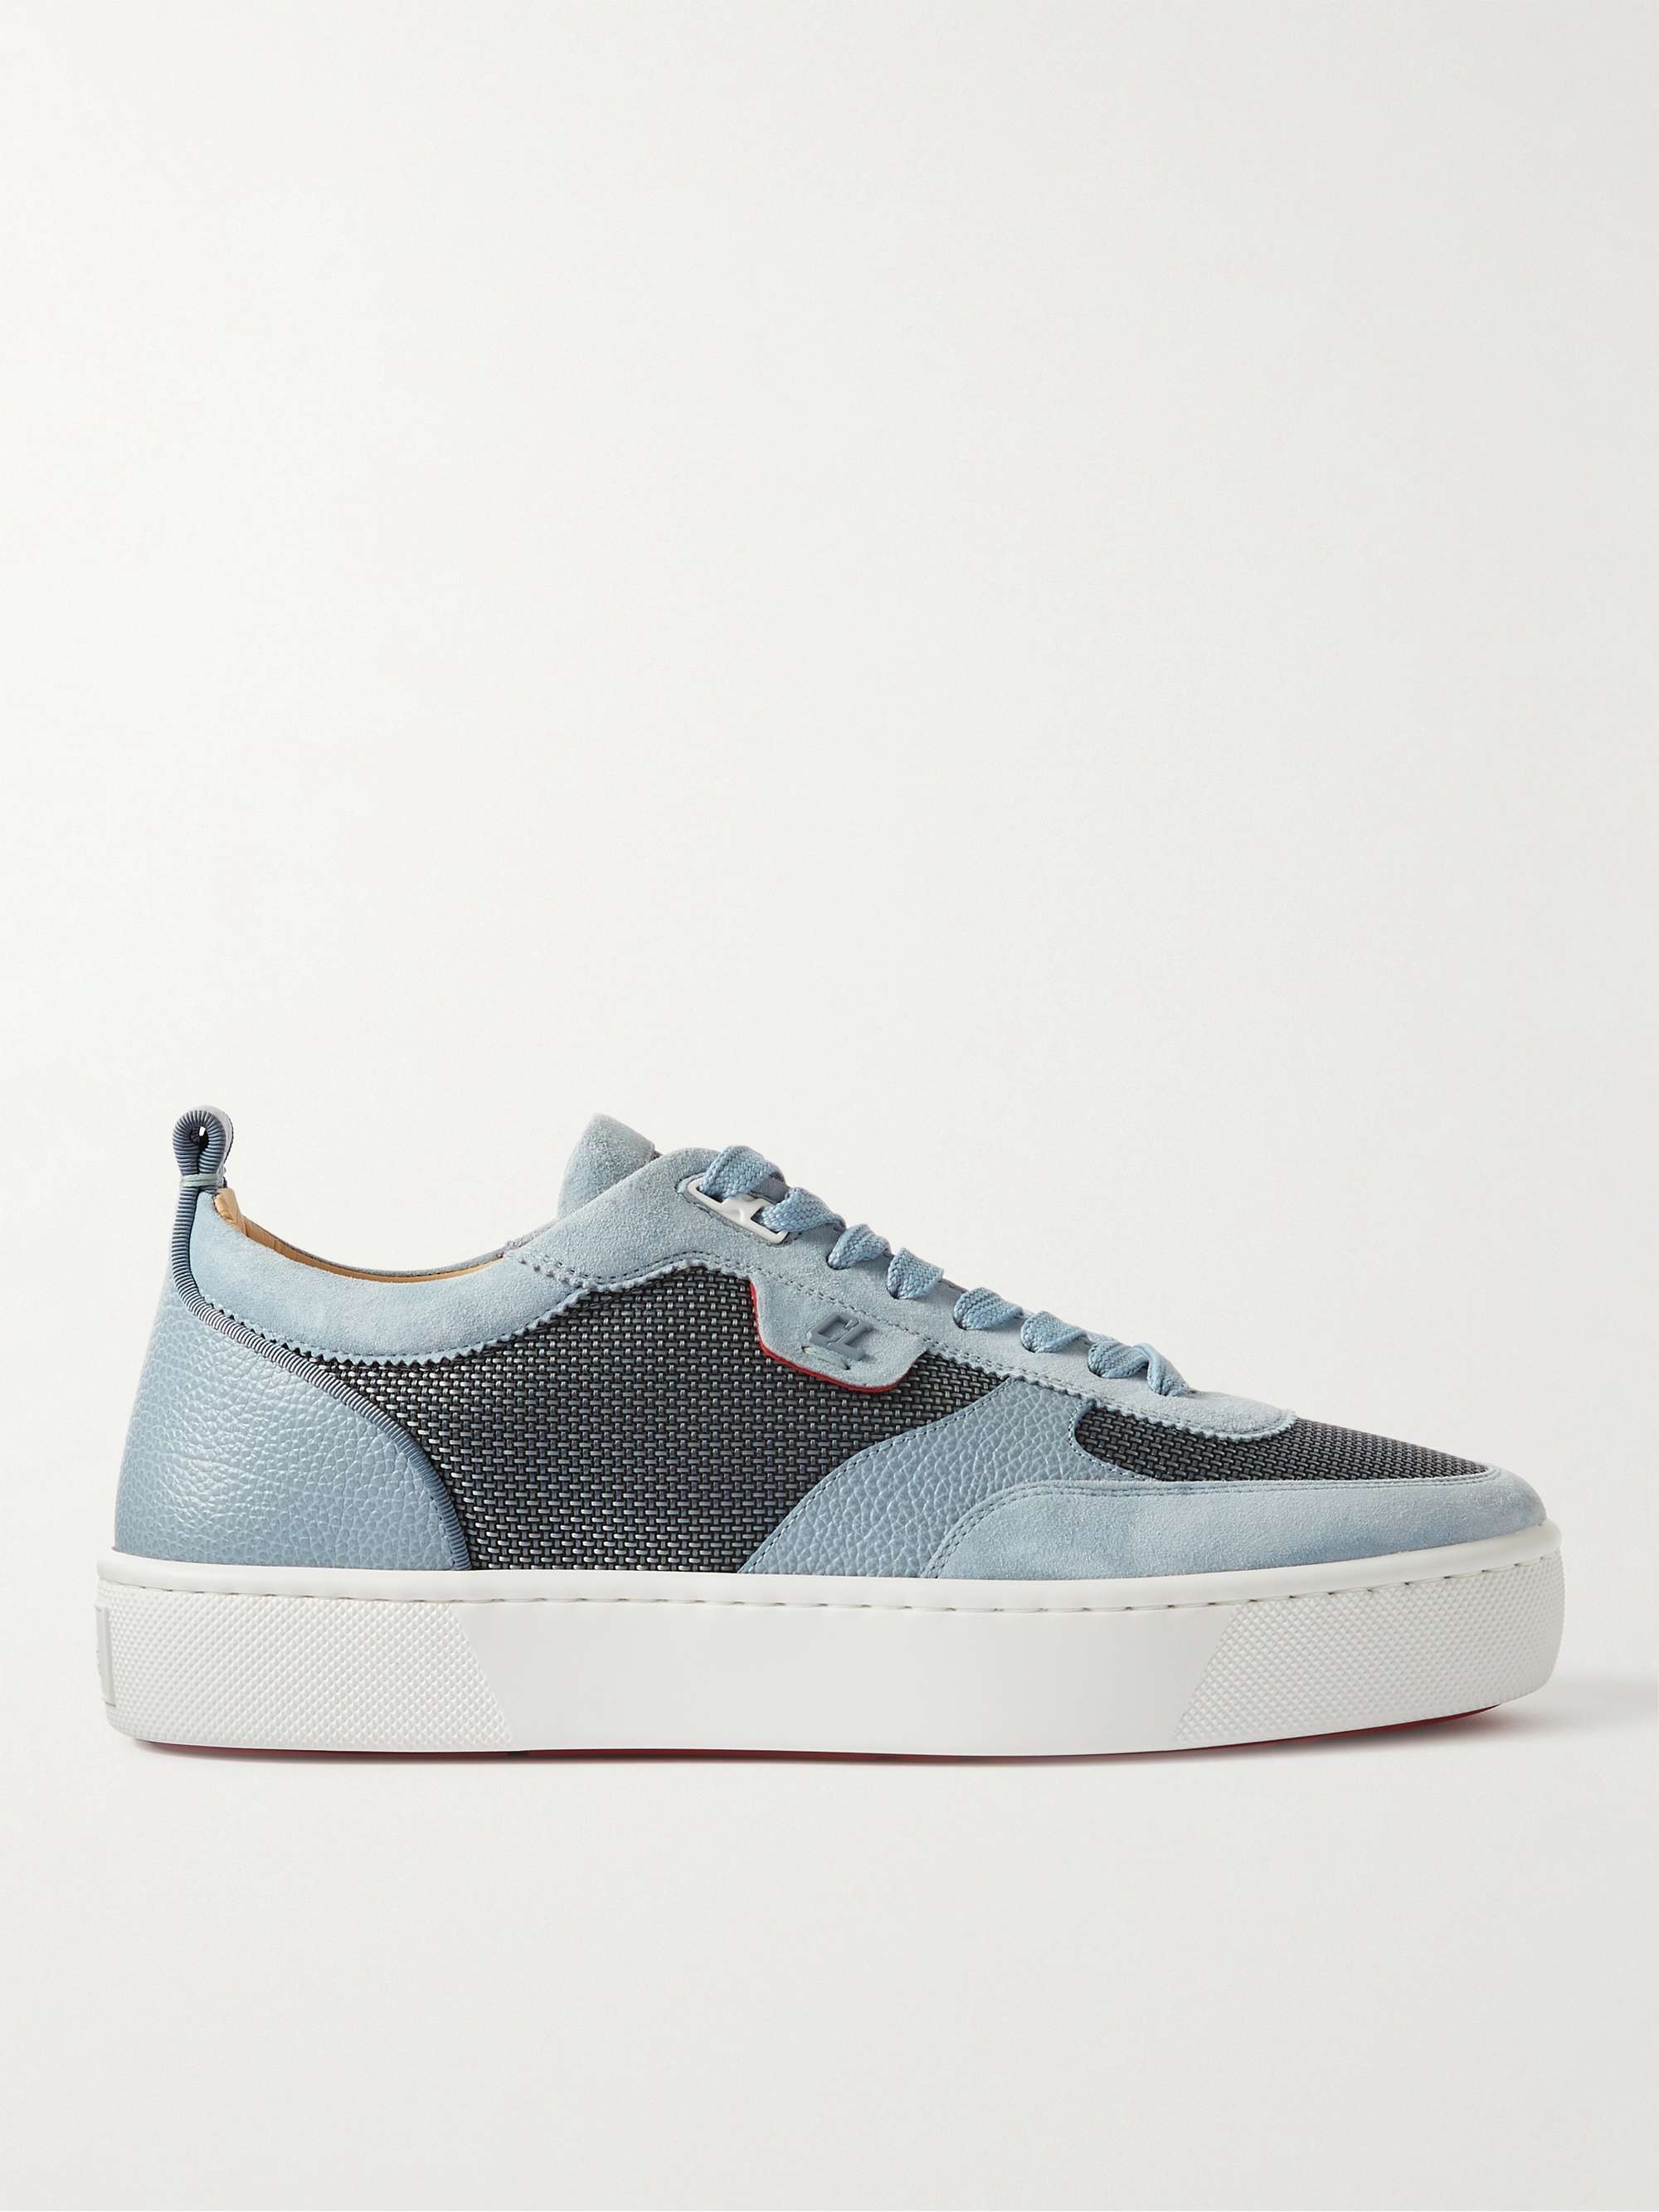 Blue Happyrui Suede, Textured-Leather and Mesh Sneakers | CHRISTIAN ...